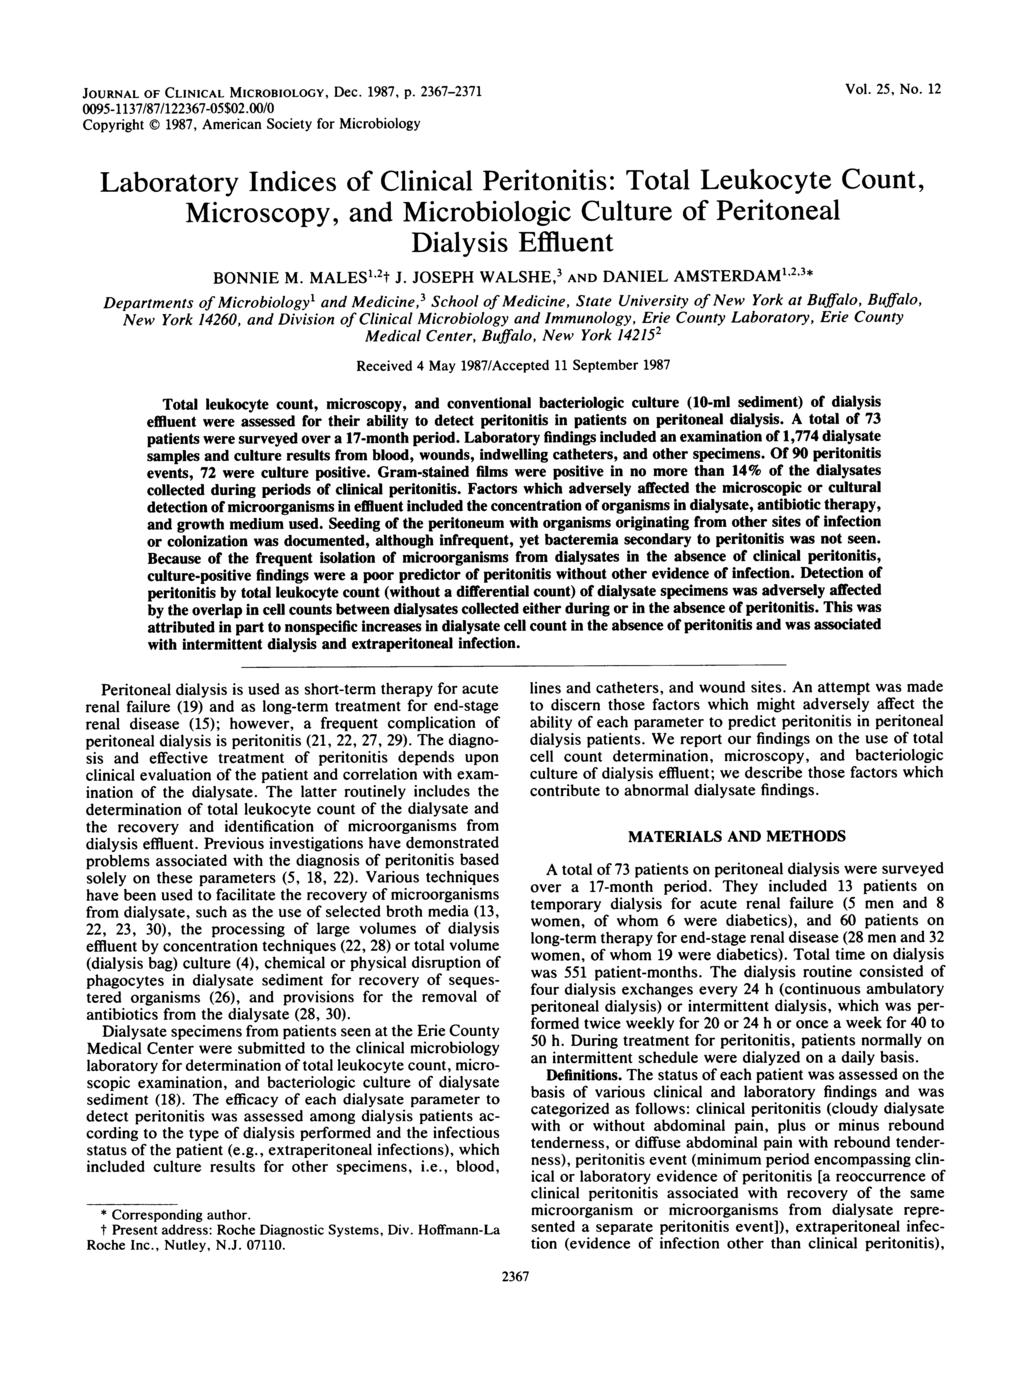 JOURNAL OF CLINICAL MICROBIOLOGY, Dec. 1987, p. 2367-2371 0095-1137/87/122367-05$02.00/0 Copyright C 1987, Americn Society for Microbiology Vol. 25, No.